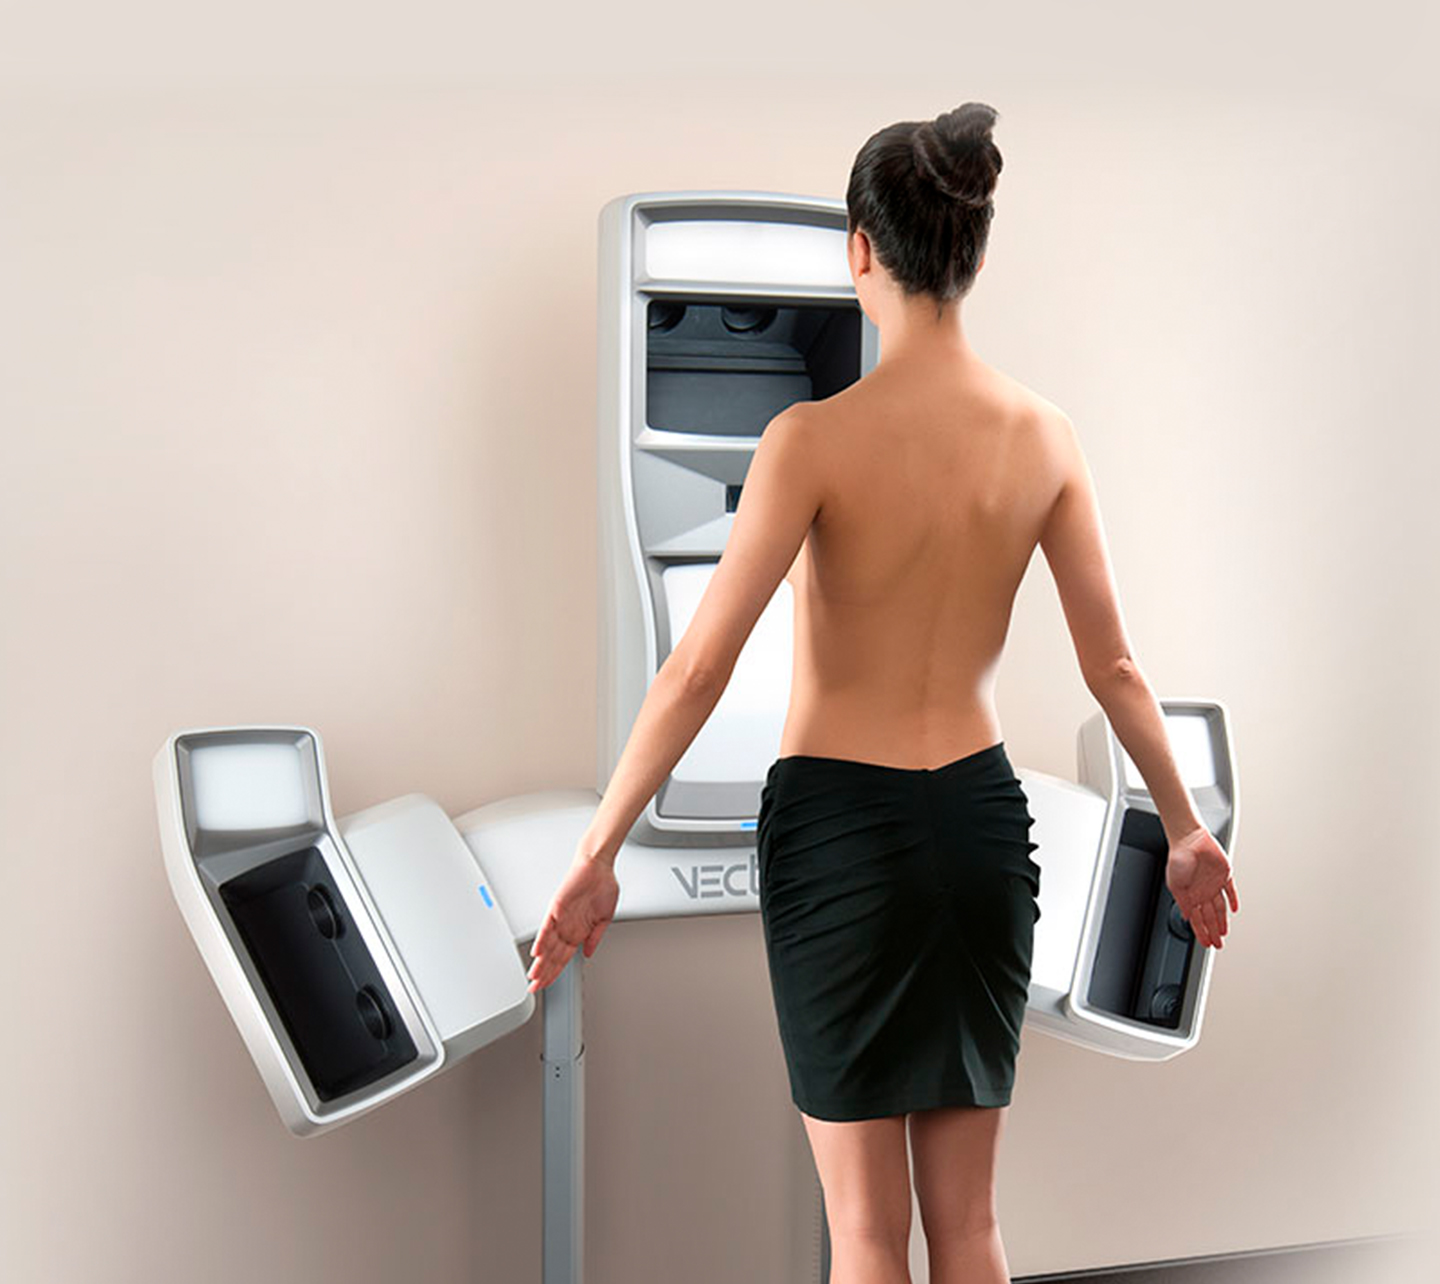 Woman standing in front of VISIA Complexion Analysis System getting scanned.